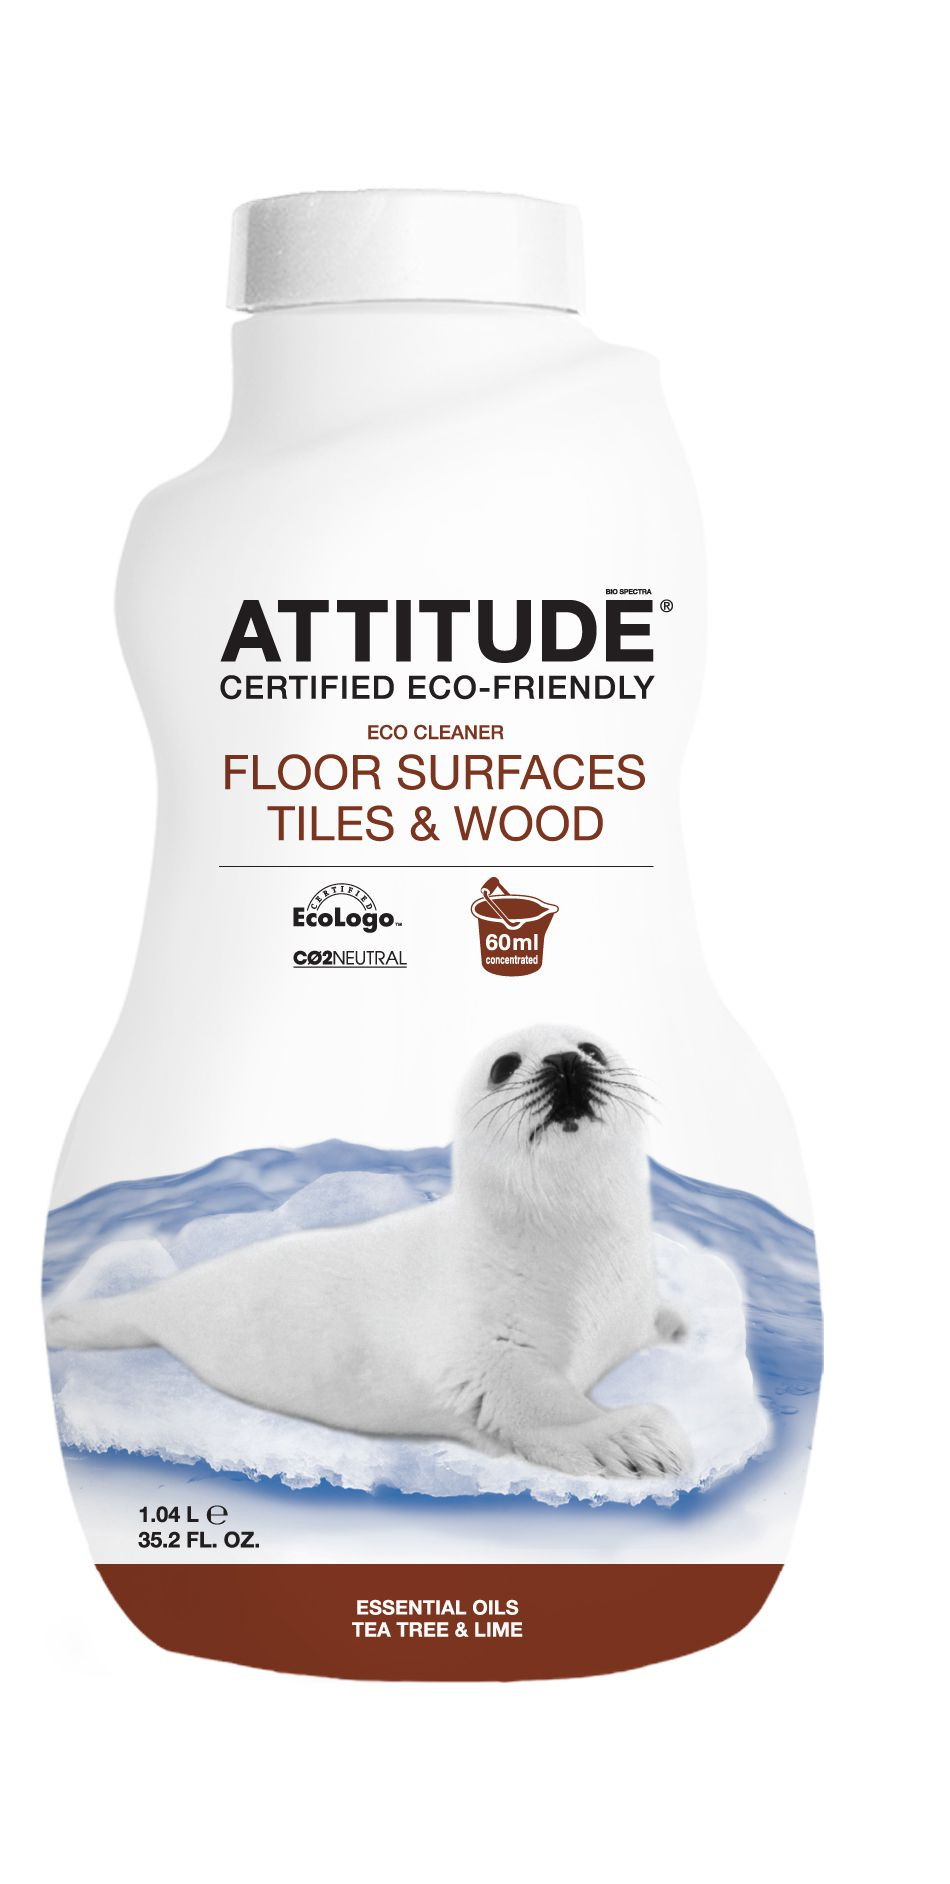 12 Elegant Hardwood Floor Cleaner Pet Safe 2024 free download hardwood floor cleaner pet safe of adore your wood floors with these eco friendly cleaners intended for attitude floor surfaces 56a45e3d3df78cf772820b12